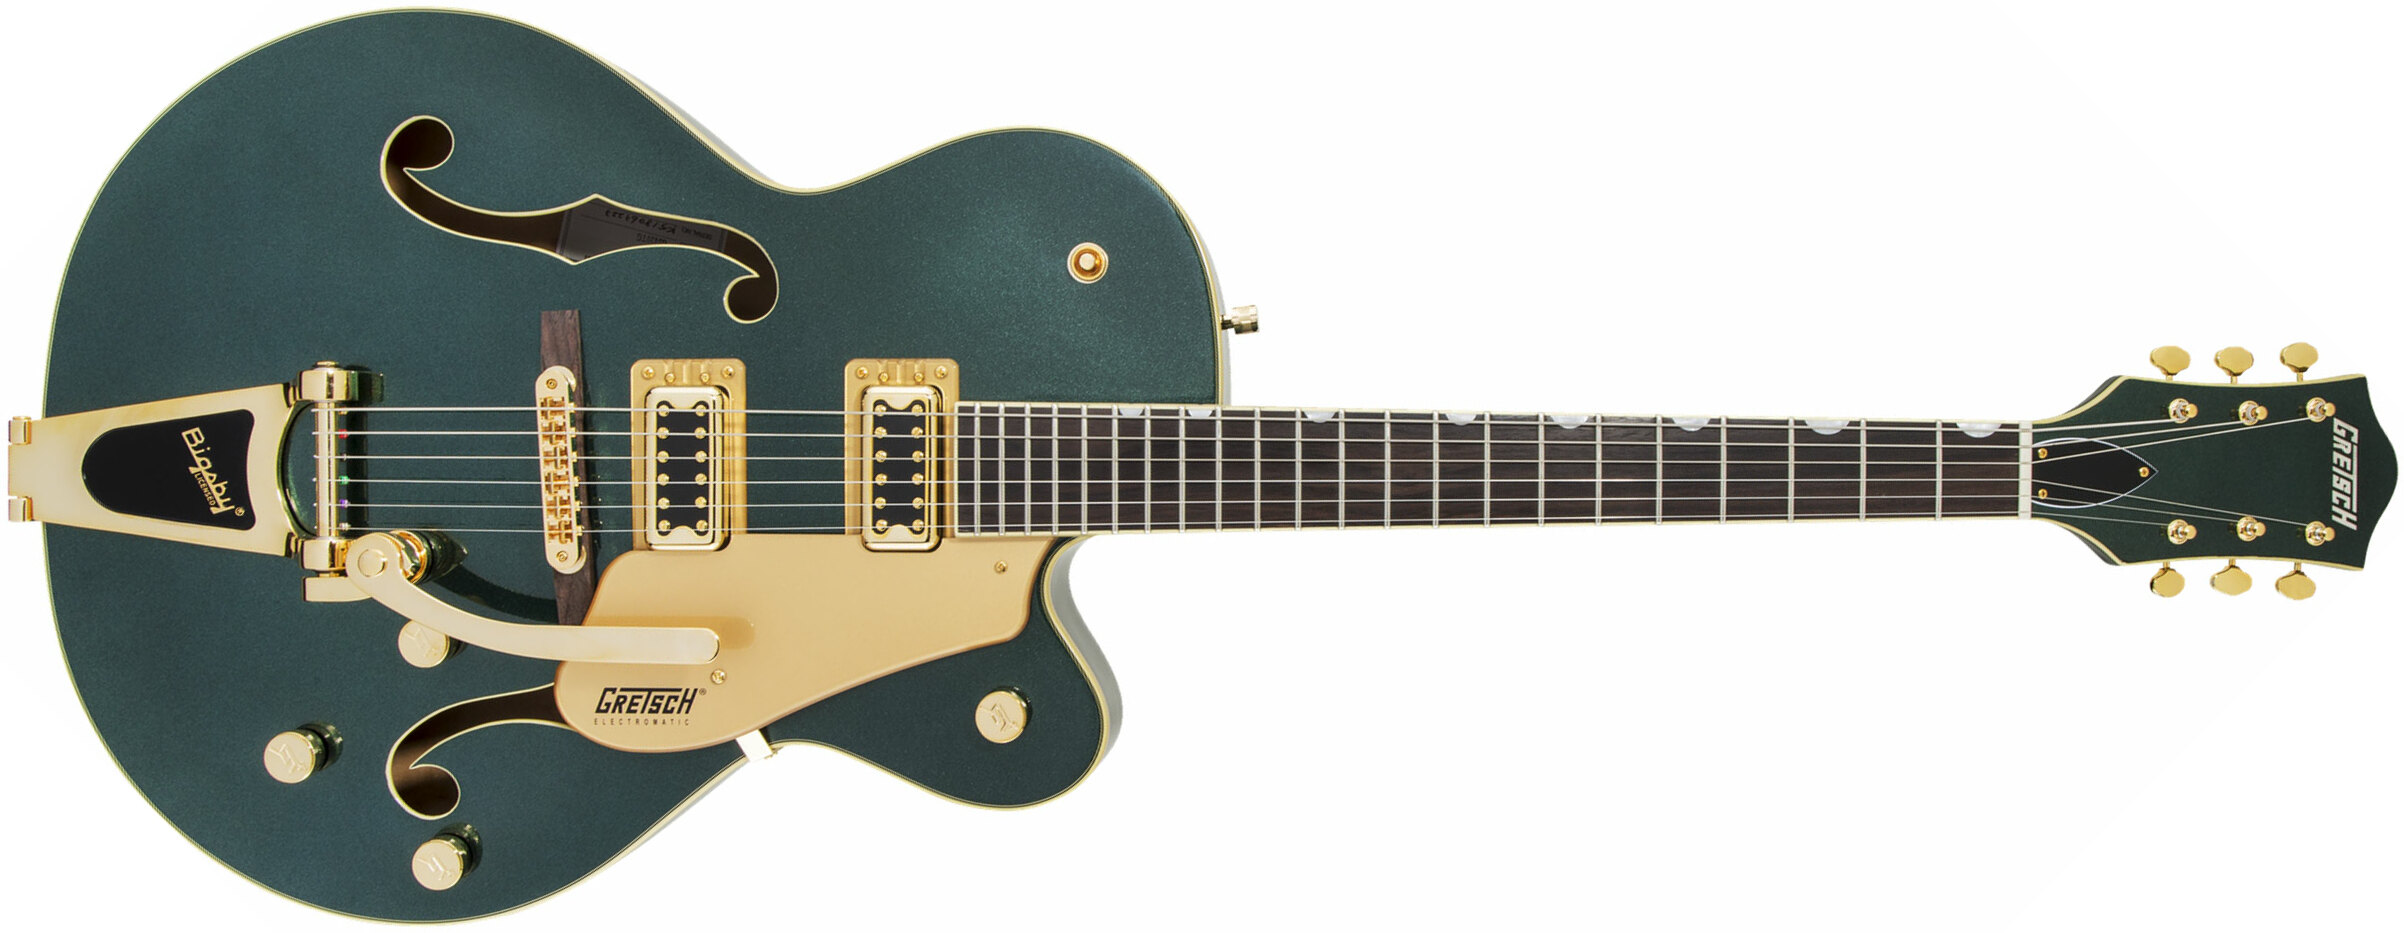 Gretsch G5420tg Electromatic Hollow Body Ltd Bigsby Rw - Cadillac Green - Guitare Électrique 3/4 Caisse & Jazz - Main picture